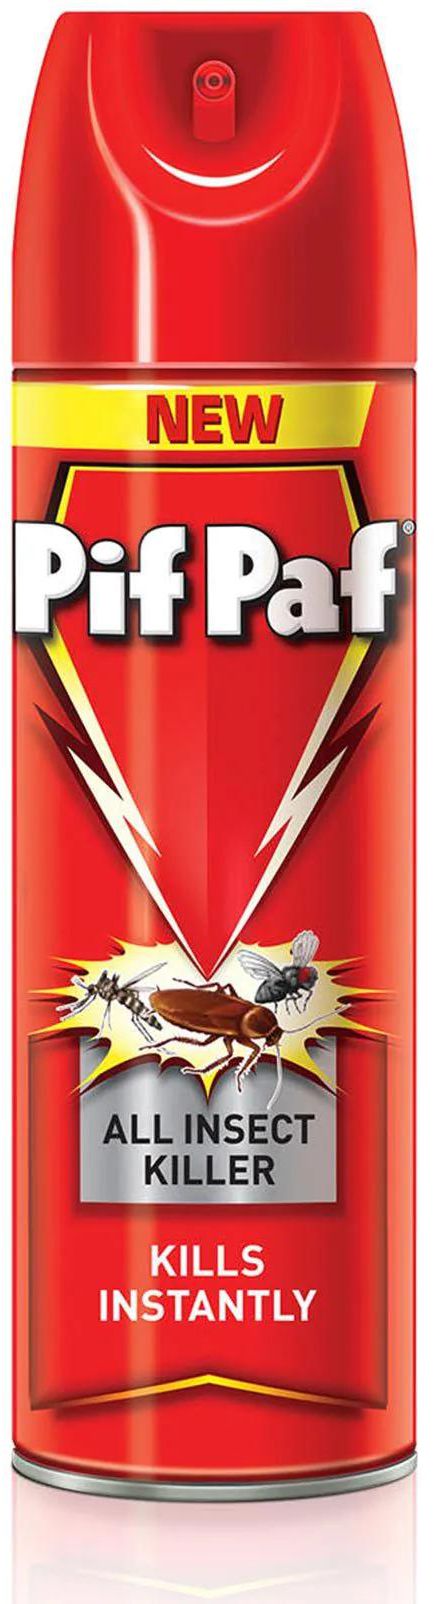 Pif paf powergard insects control all insect killer spray 300 ml